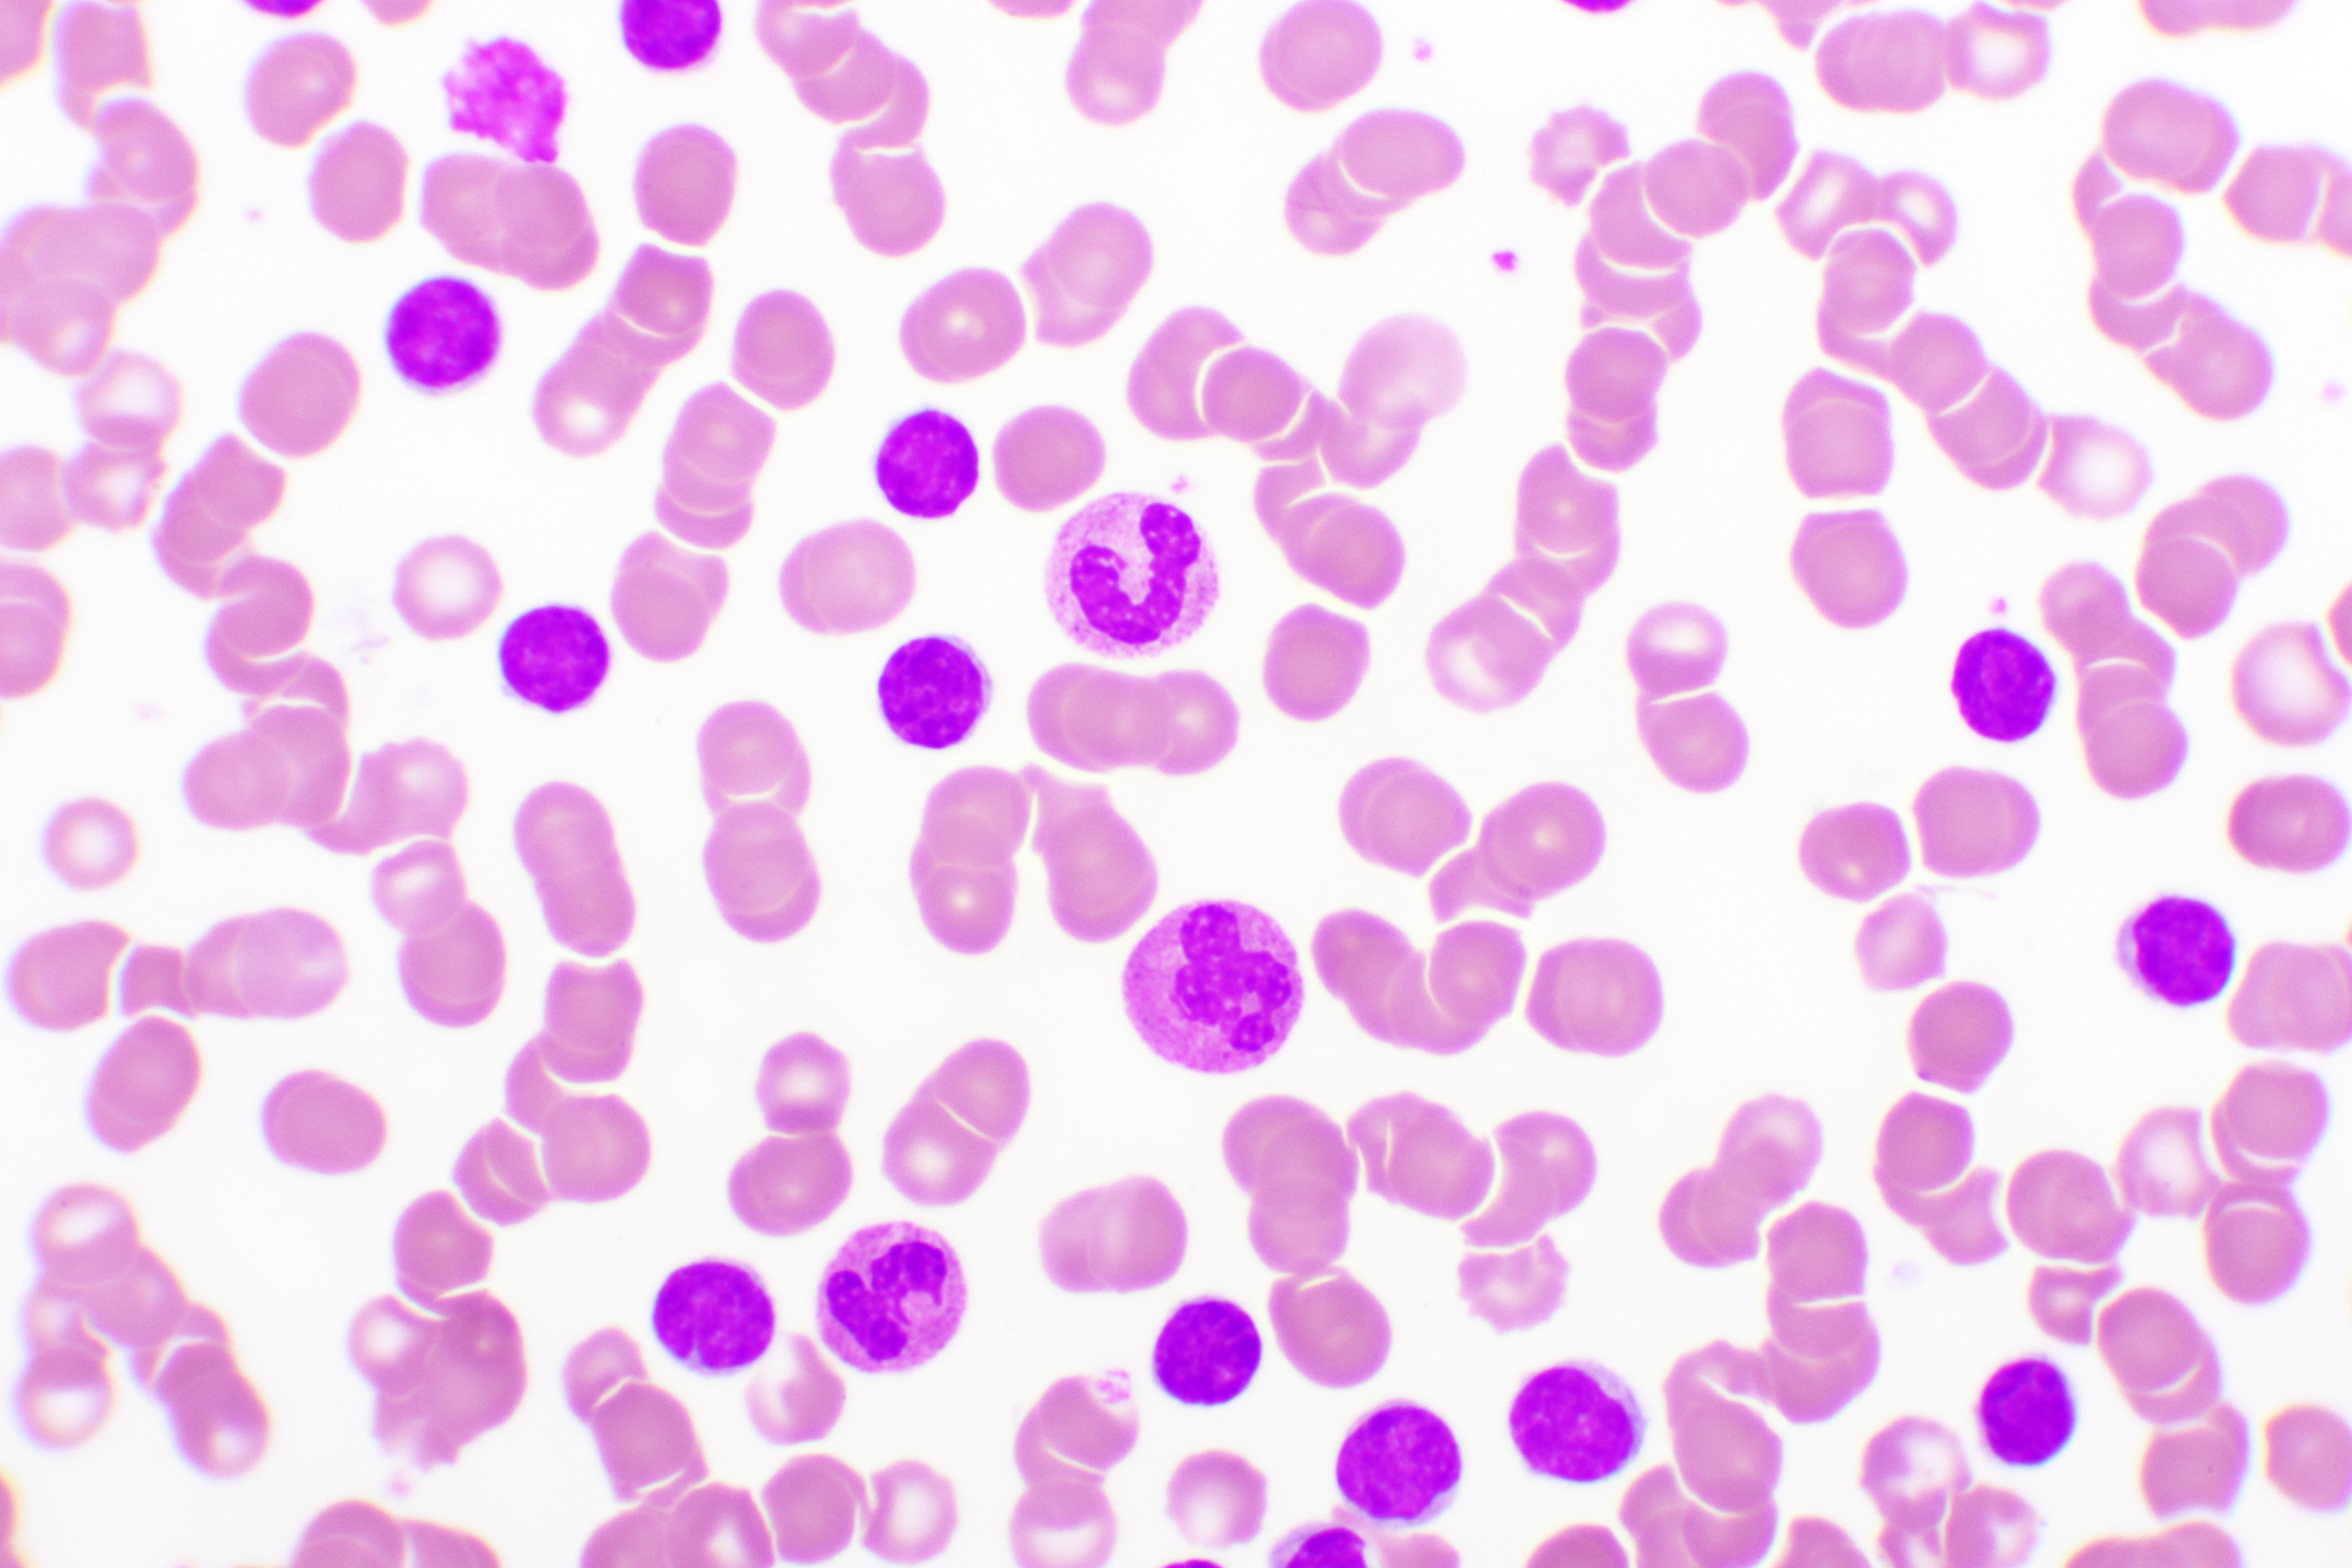 Blood cancer analysis could lead to more targeted patient care